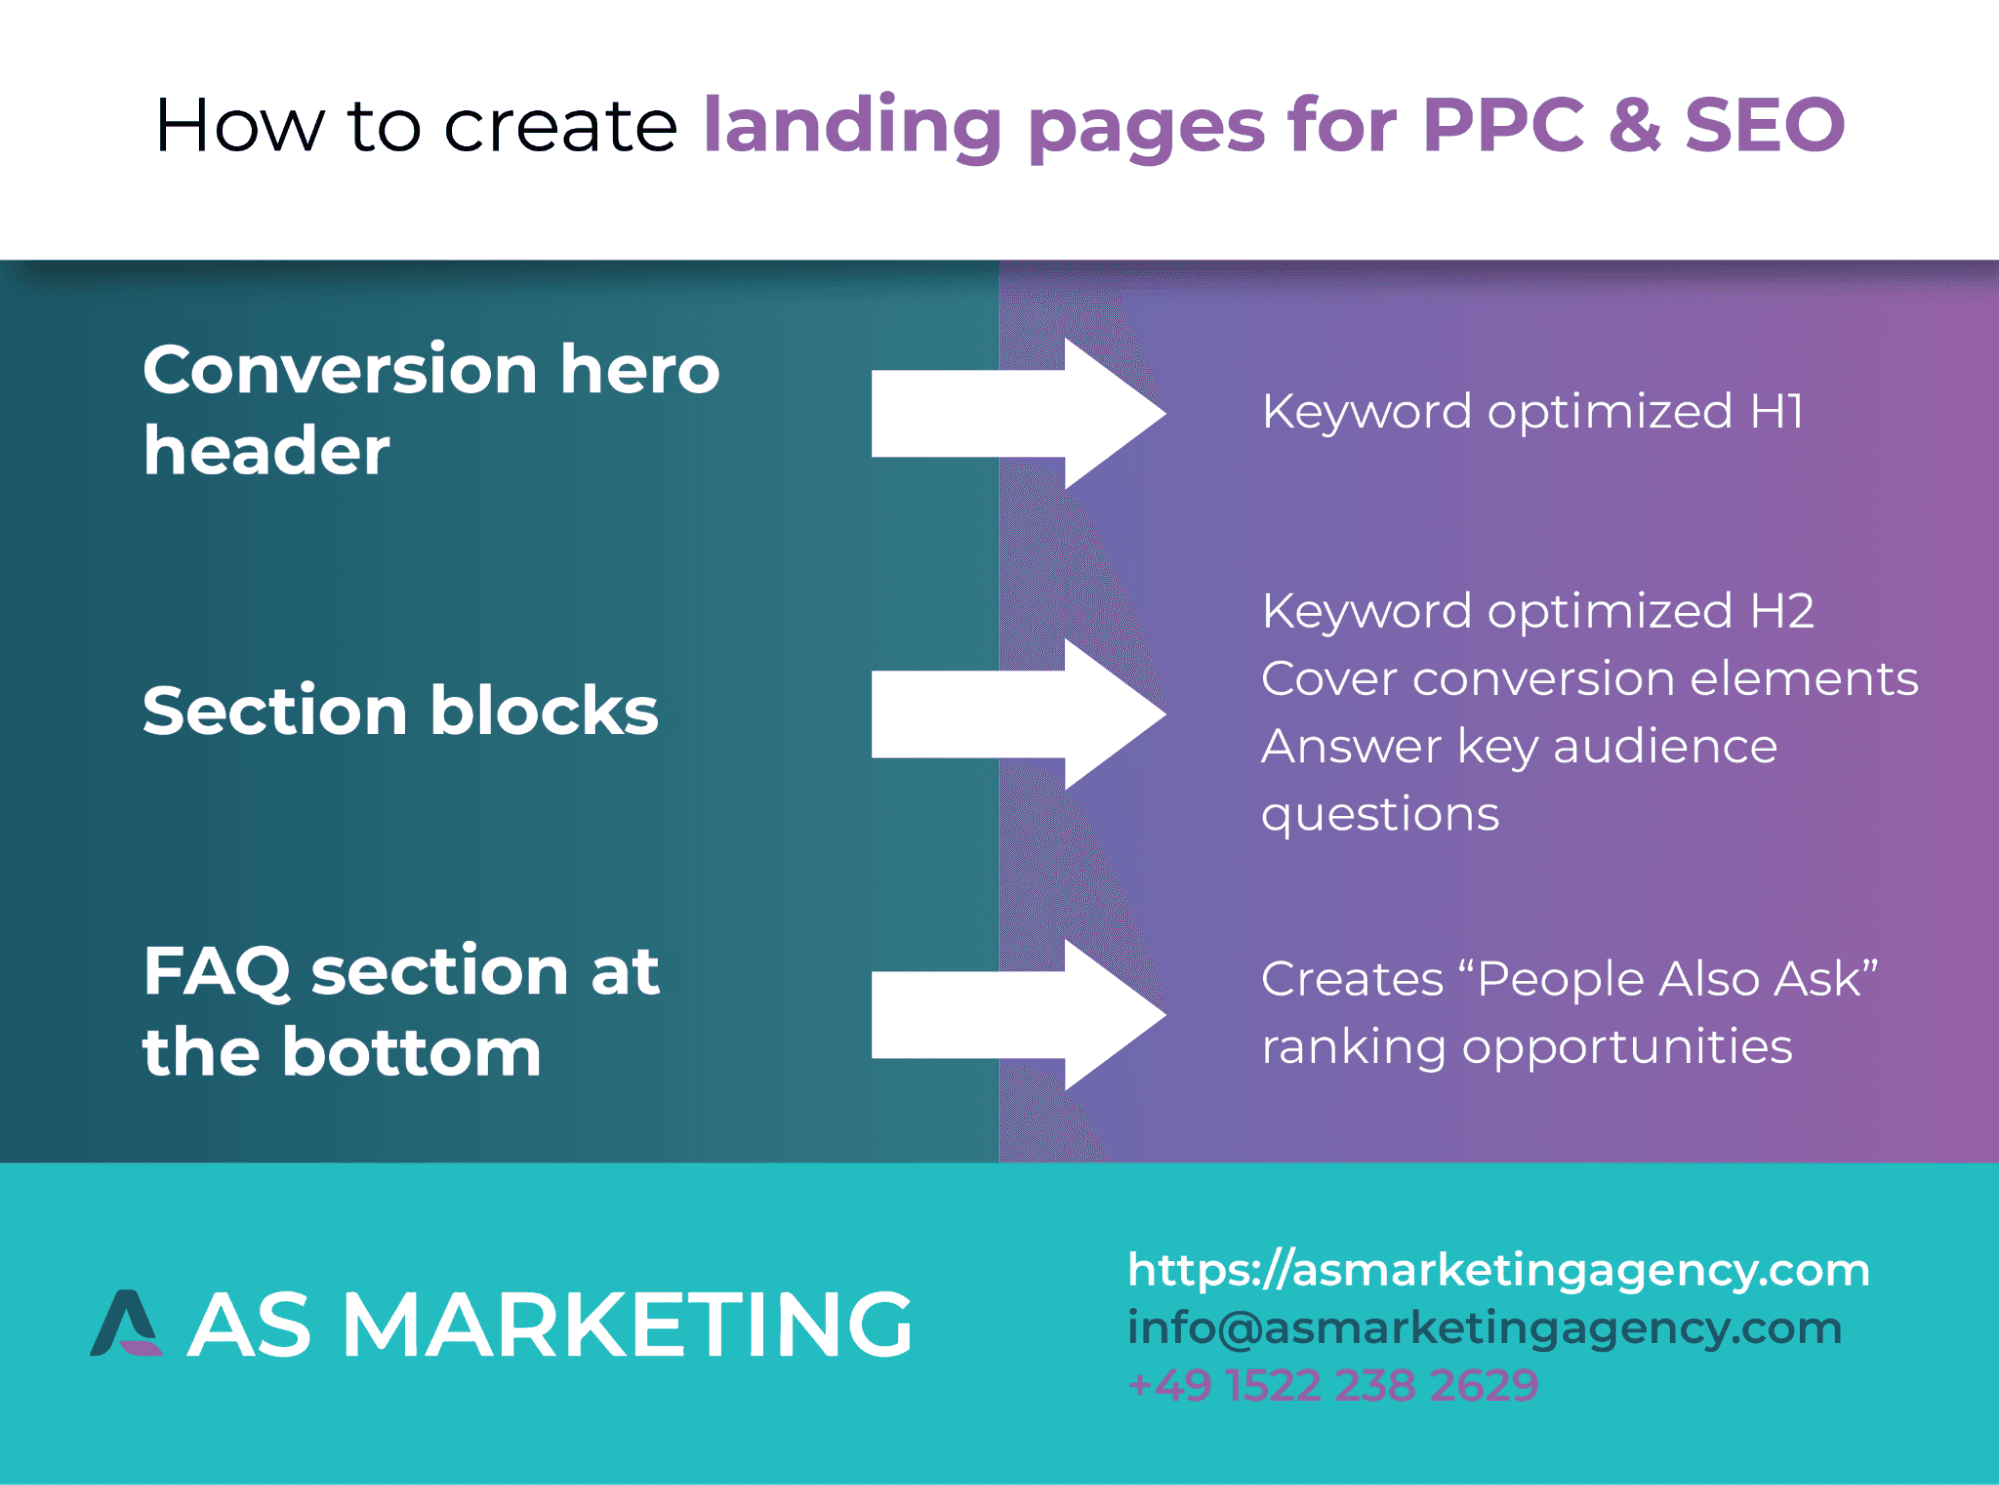 Infographic with details on how to create landing pages for both PPC and SEO